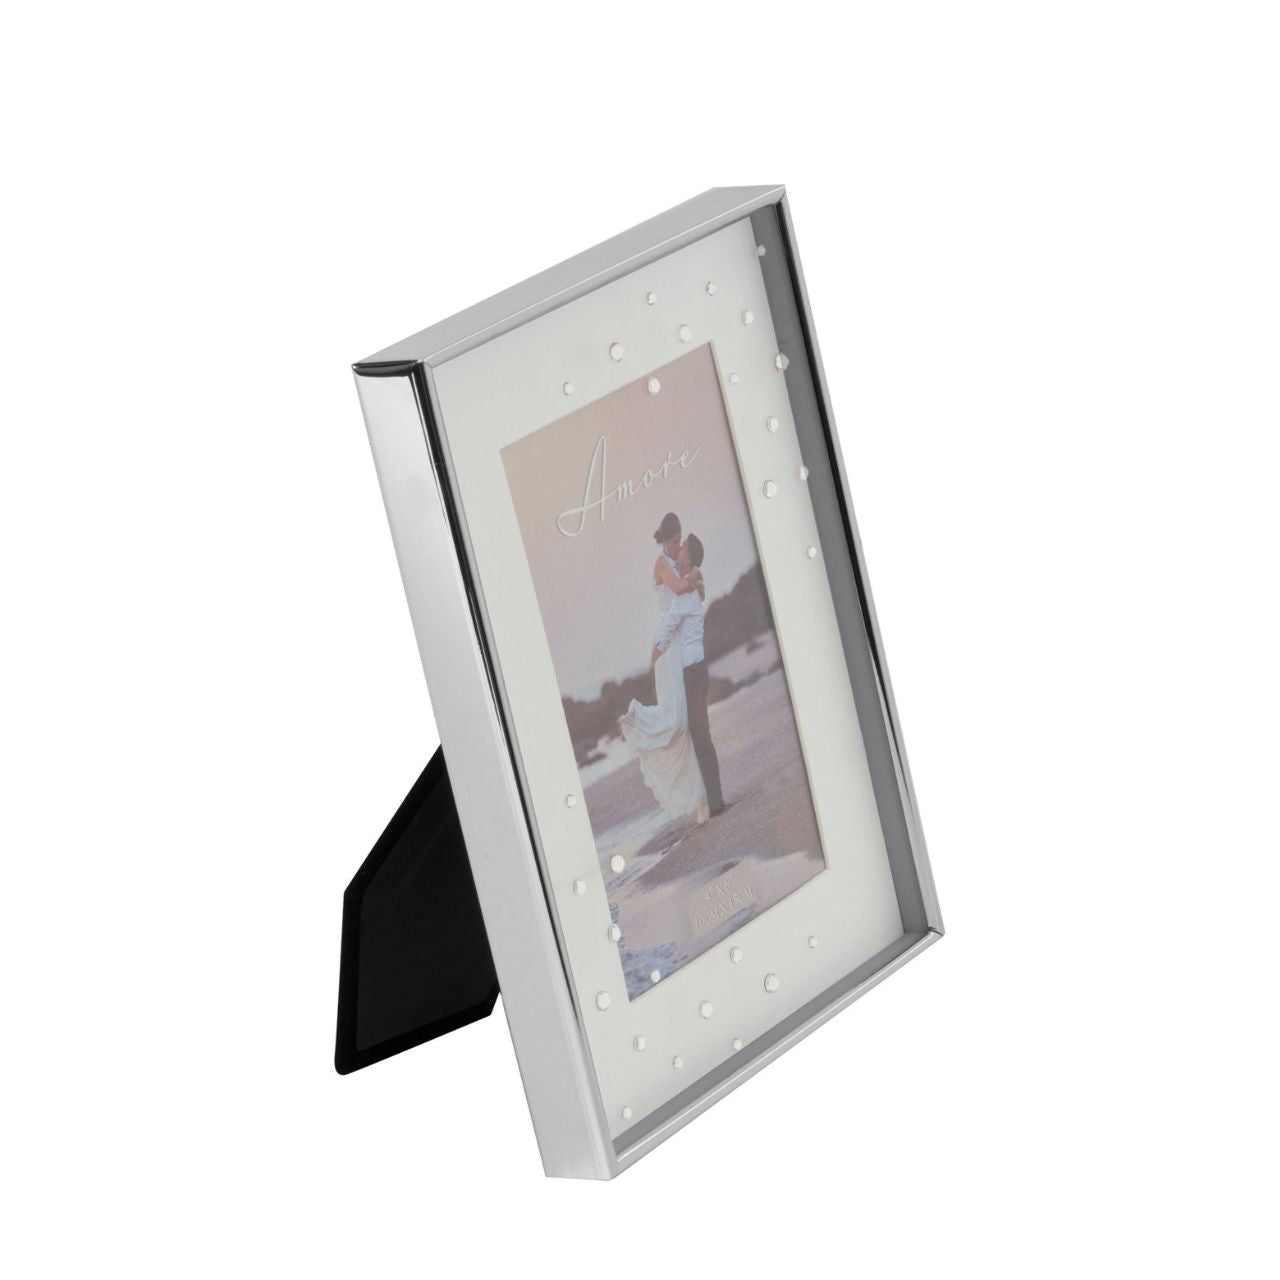 A beautiful silver plated box frame with 4" x 6" (10x15cm) aperture from the AMORE BY JULIANA® Wedding Day Collection. The frame features a crisp white mount and the glass is embellished with a spray of crystals. Complete with standing strut.